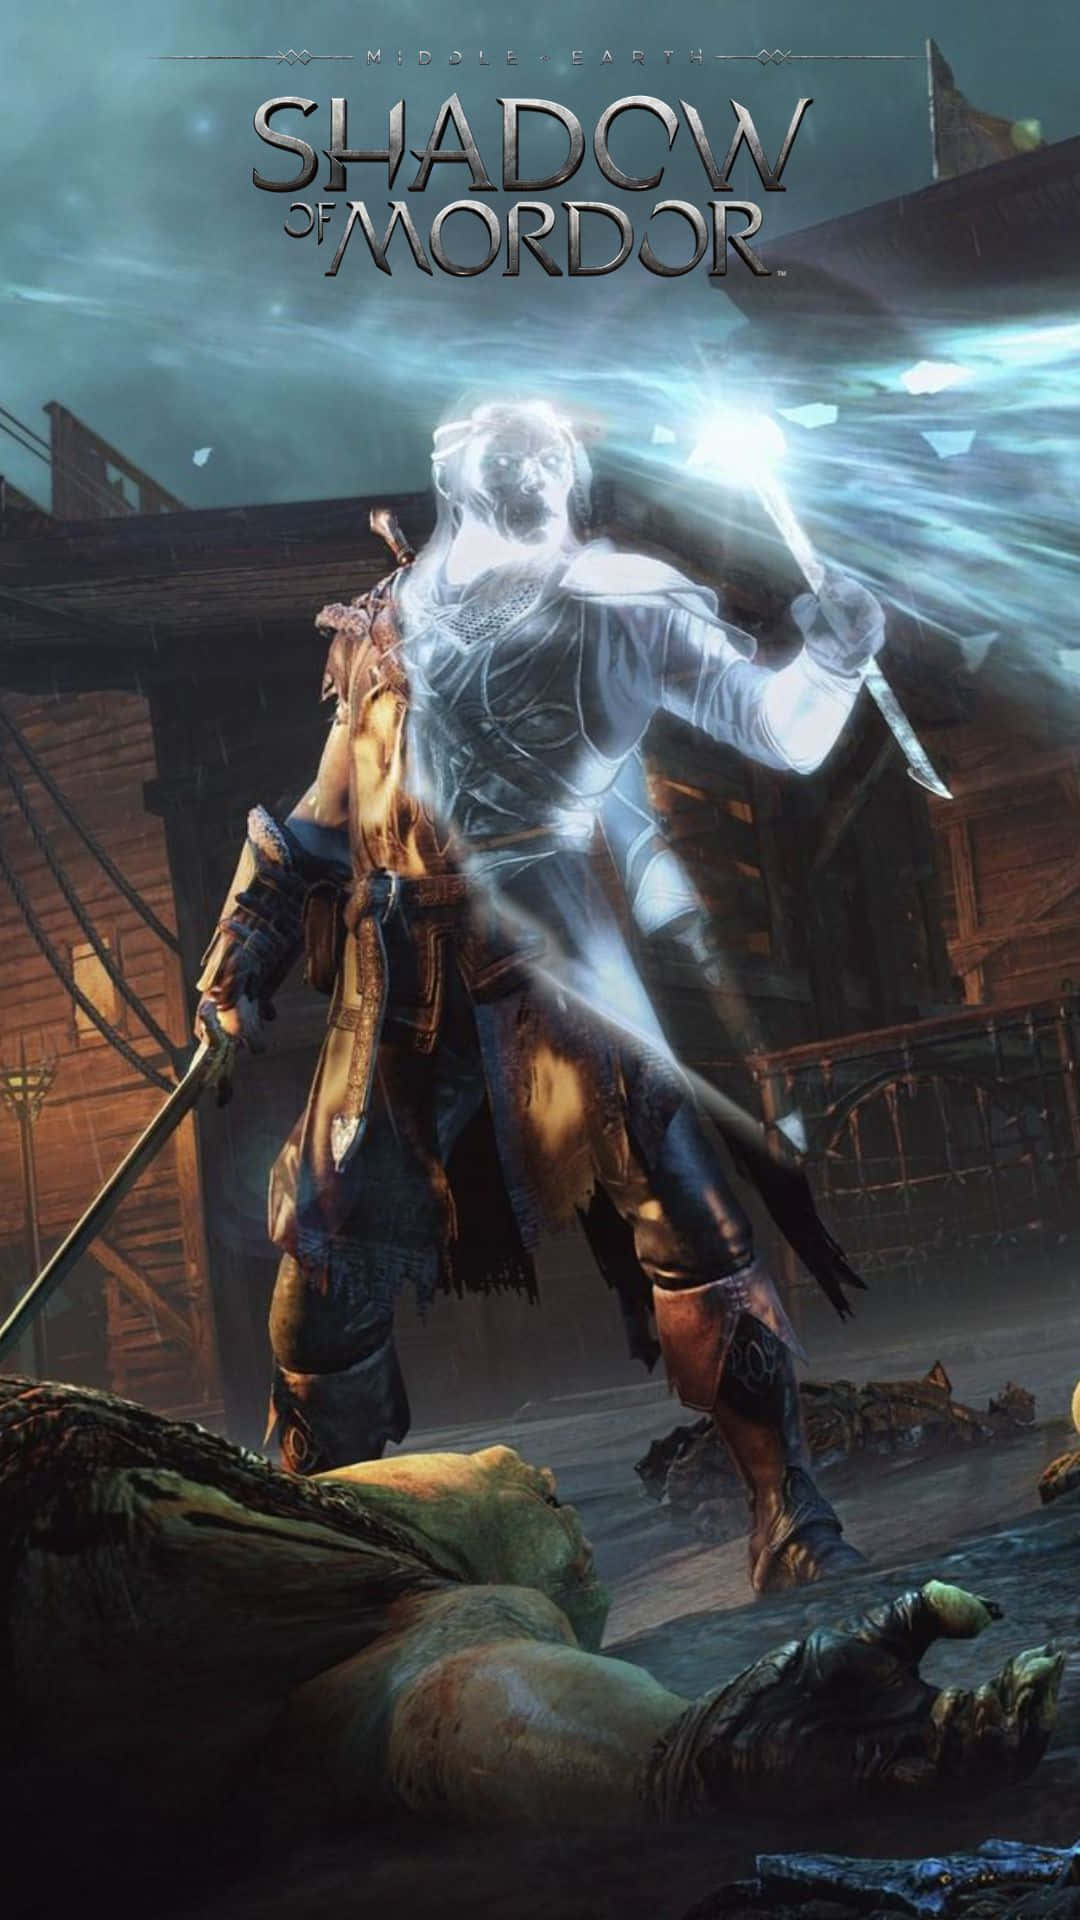 Experience the Middle-earth with the Android edition of Shadow of Mordor